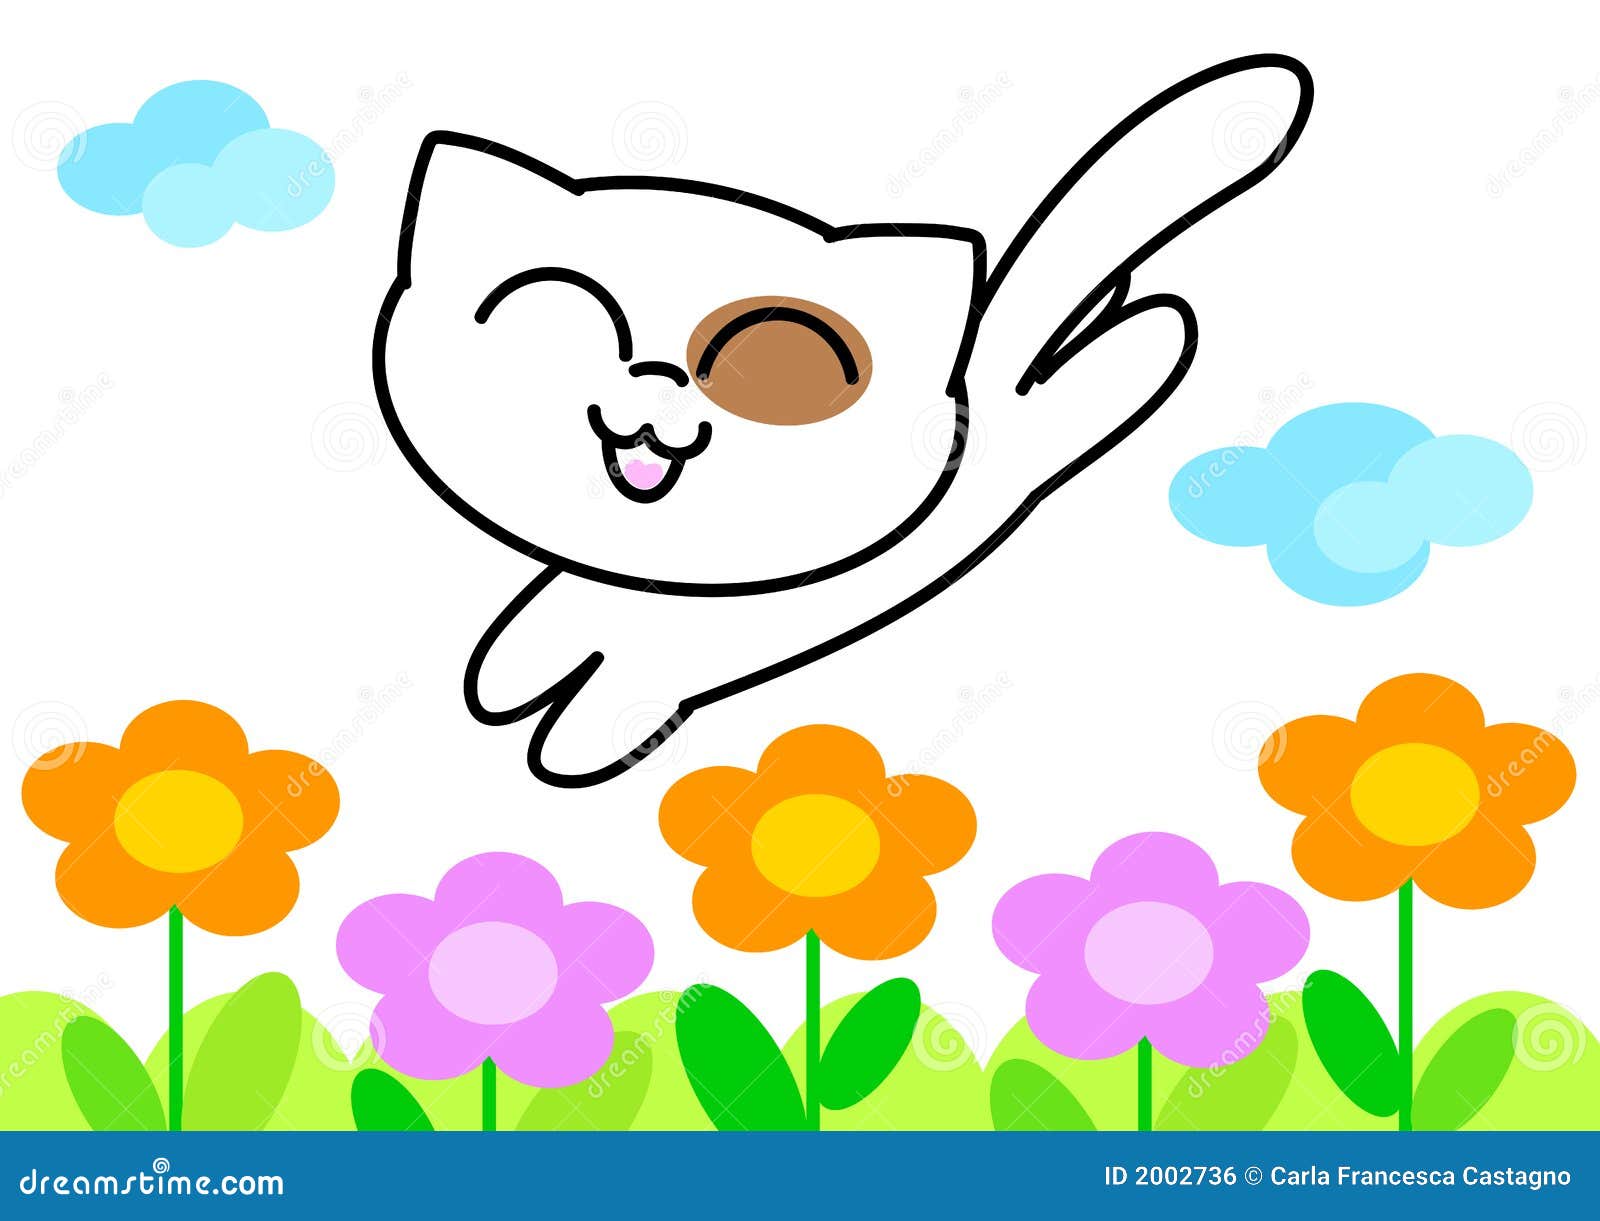 funny cat with flowers - ial 